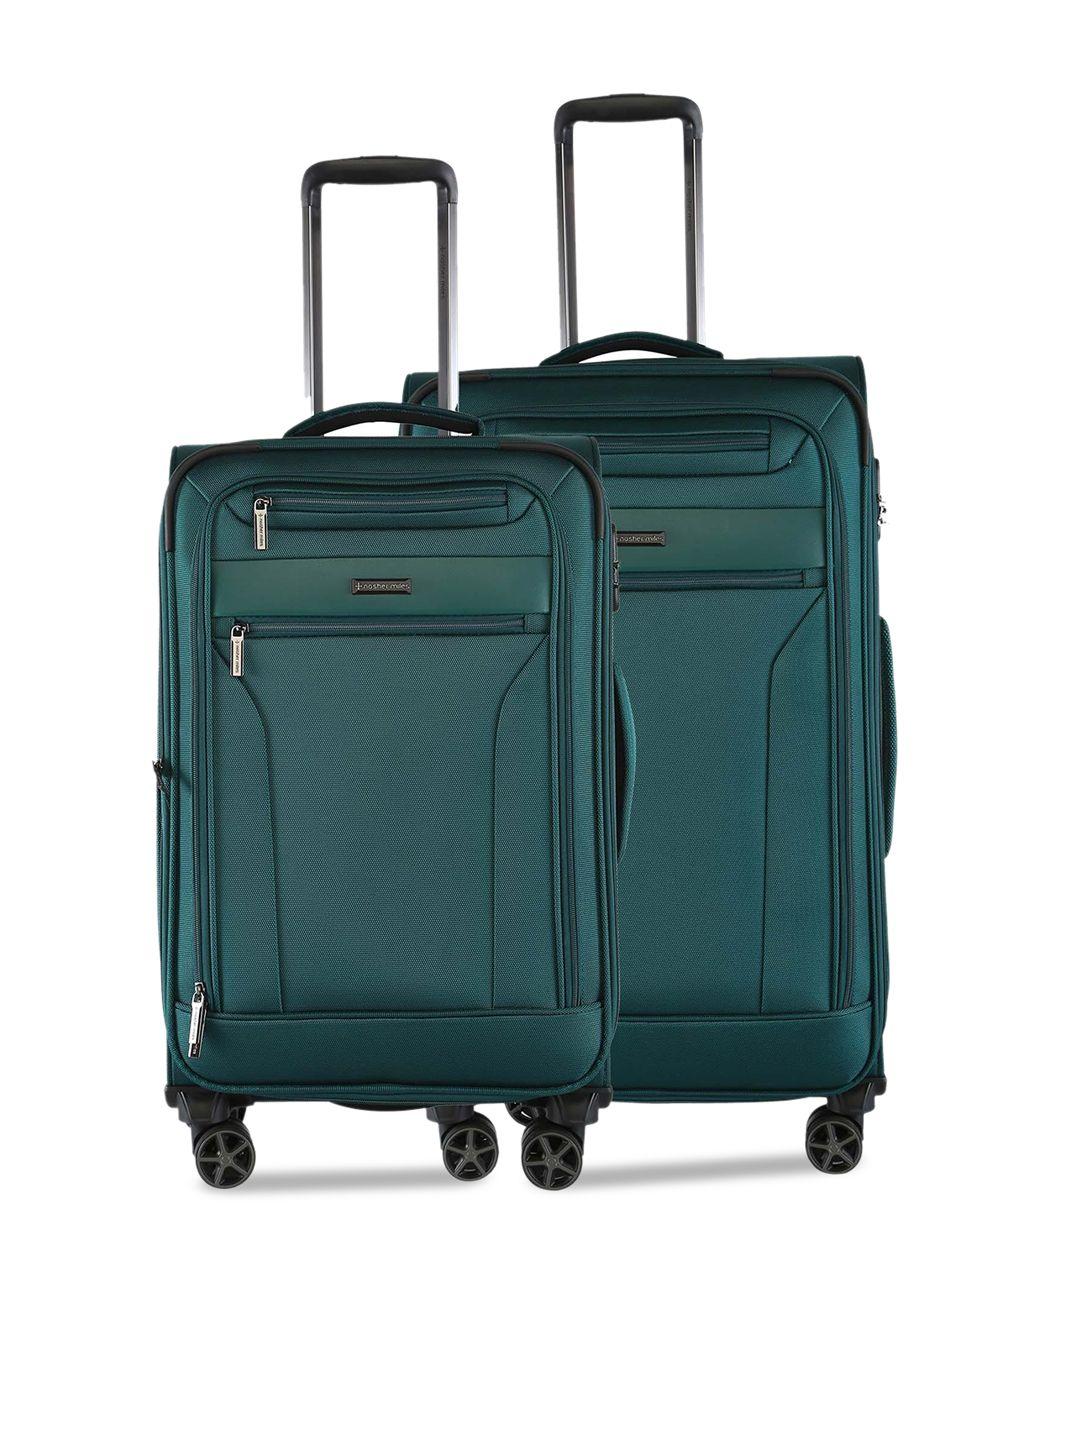 nasher miles set of 2 berlin expander soft-sided trolley bags